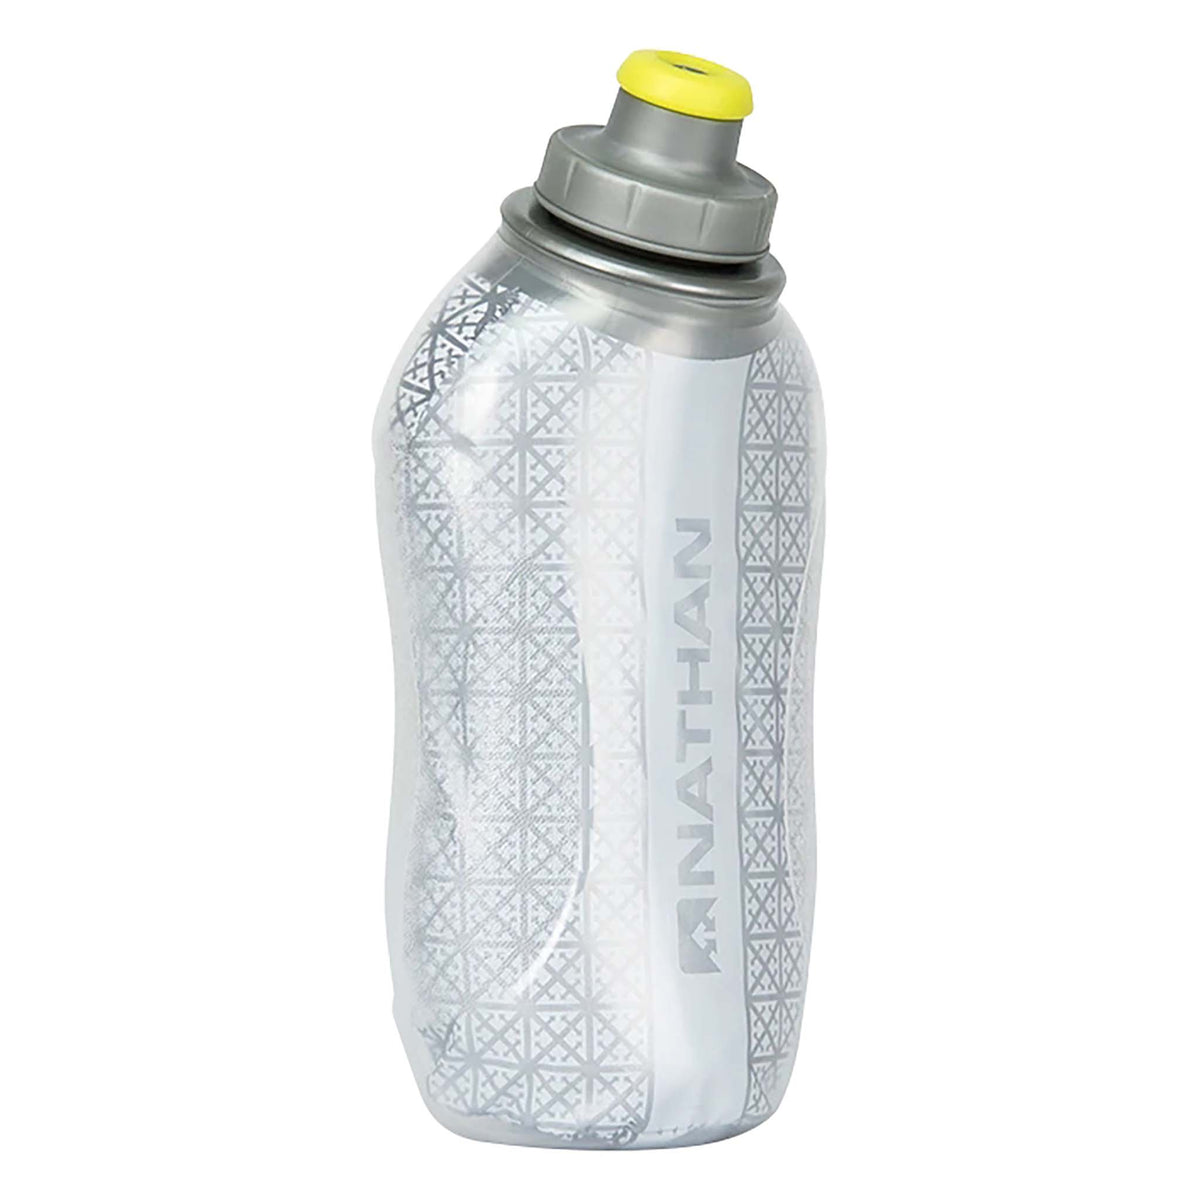 Nathan SpeedDraw Insulated Flask 18 oz bouteille d&#39;hydratation de course a pied